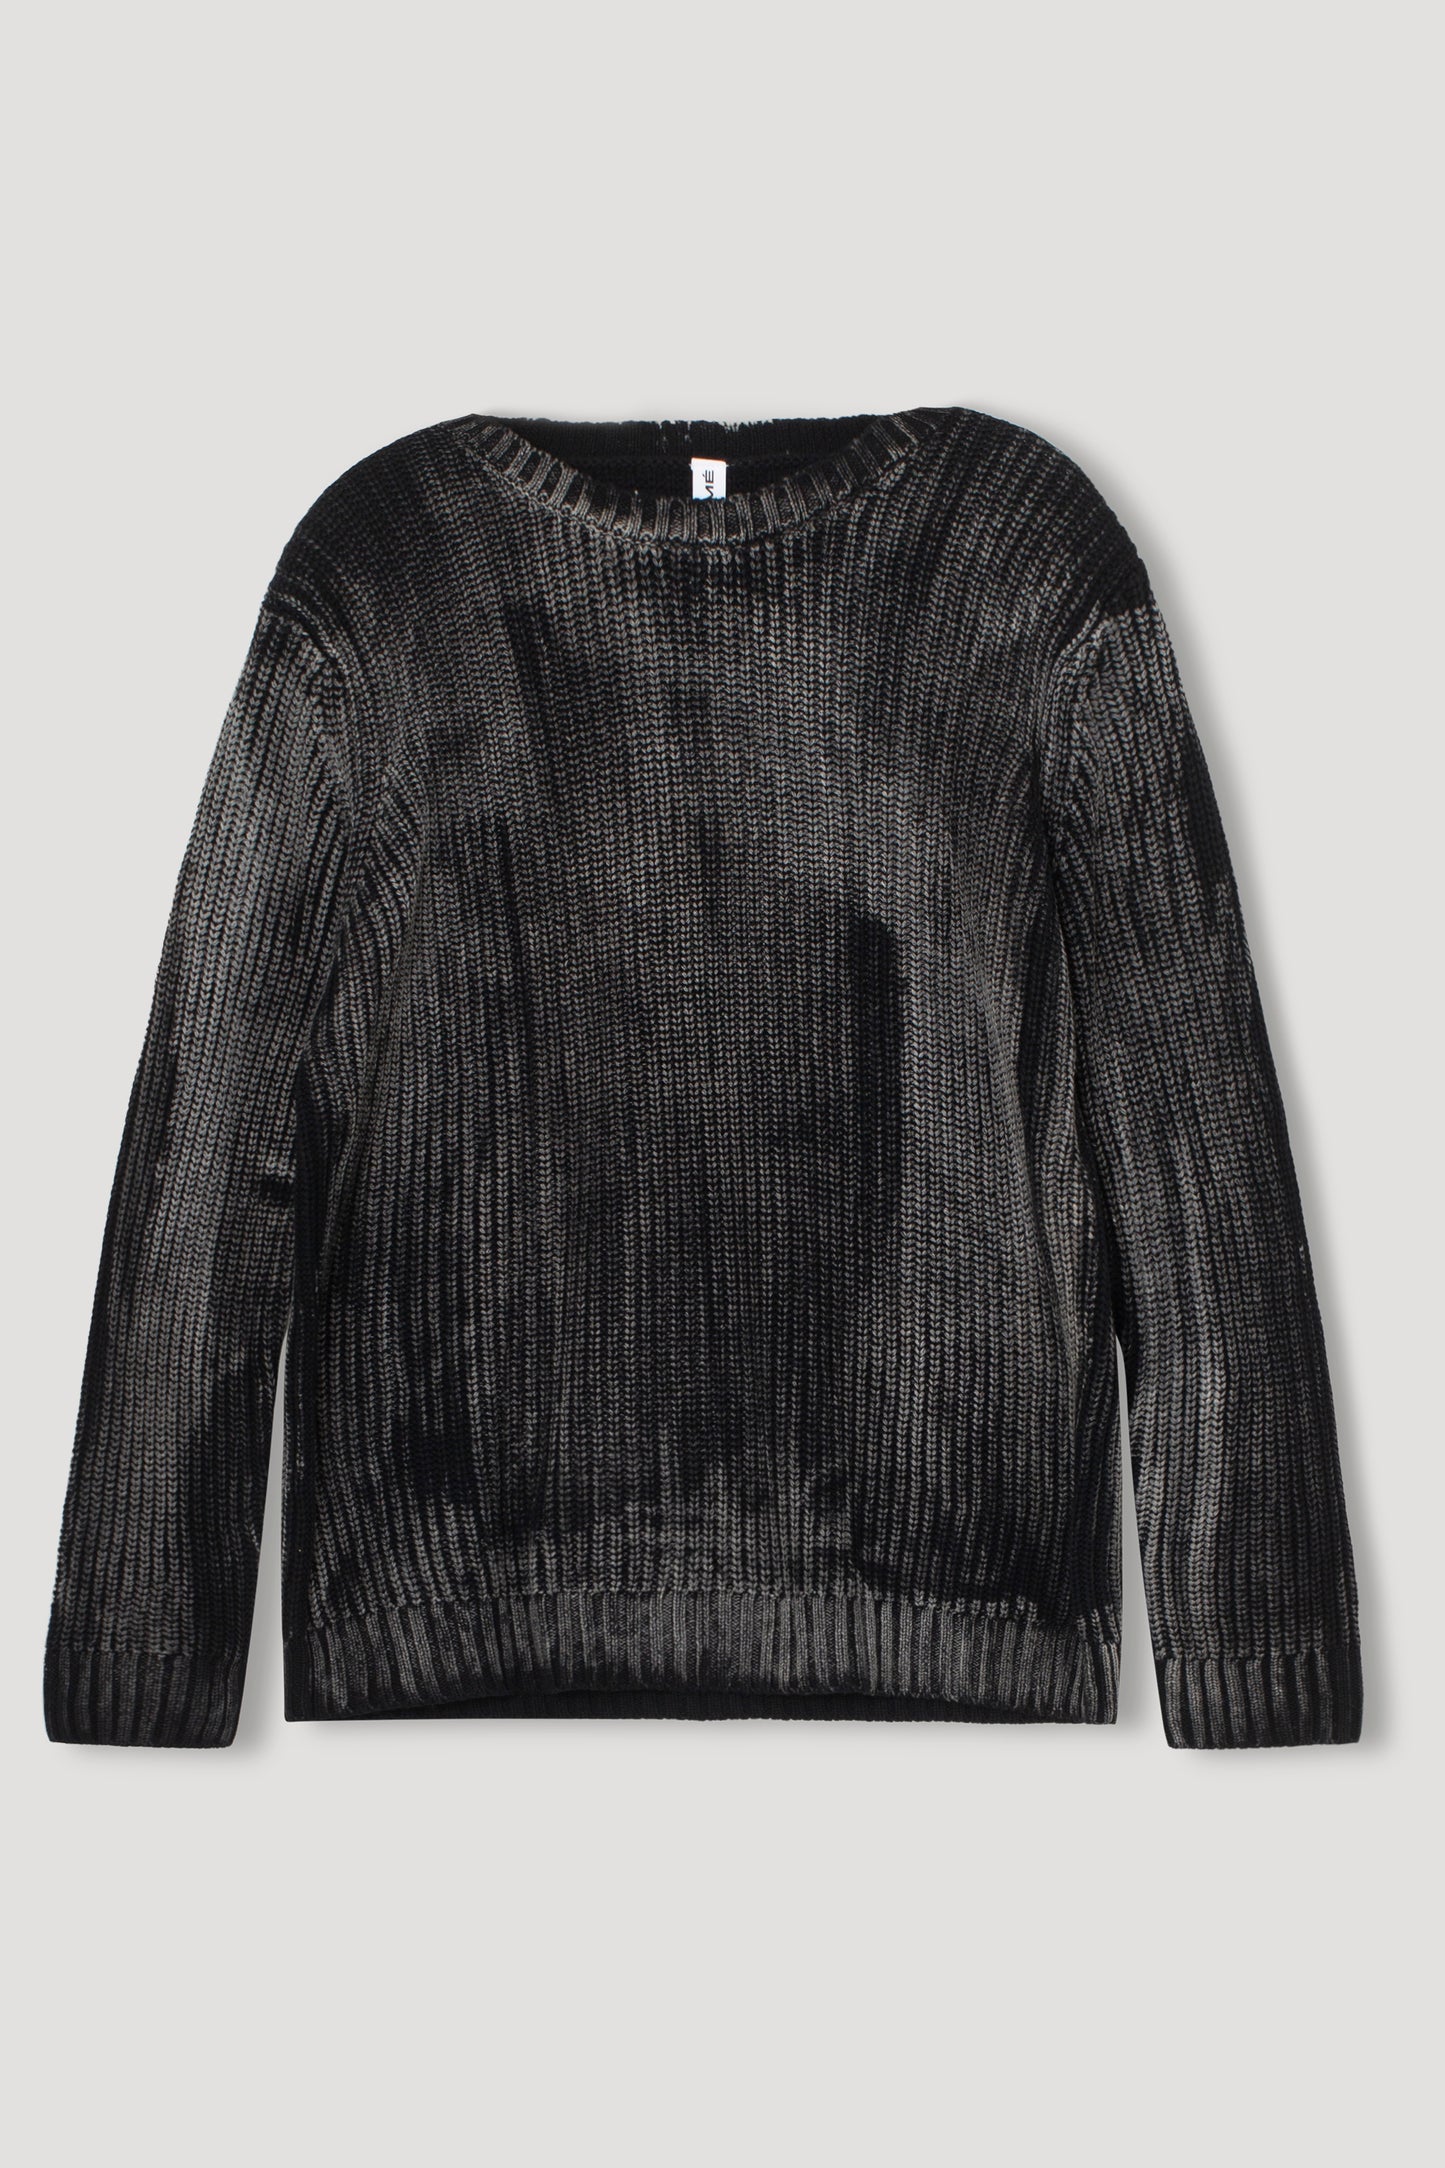 AtlasRS Knit Charcoal